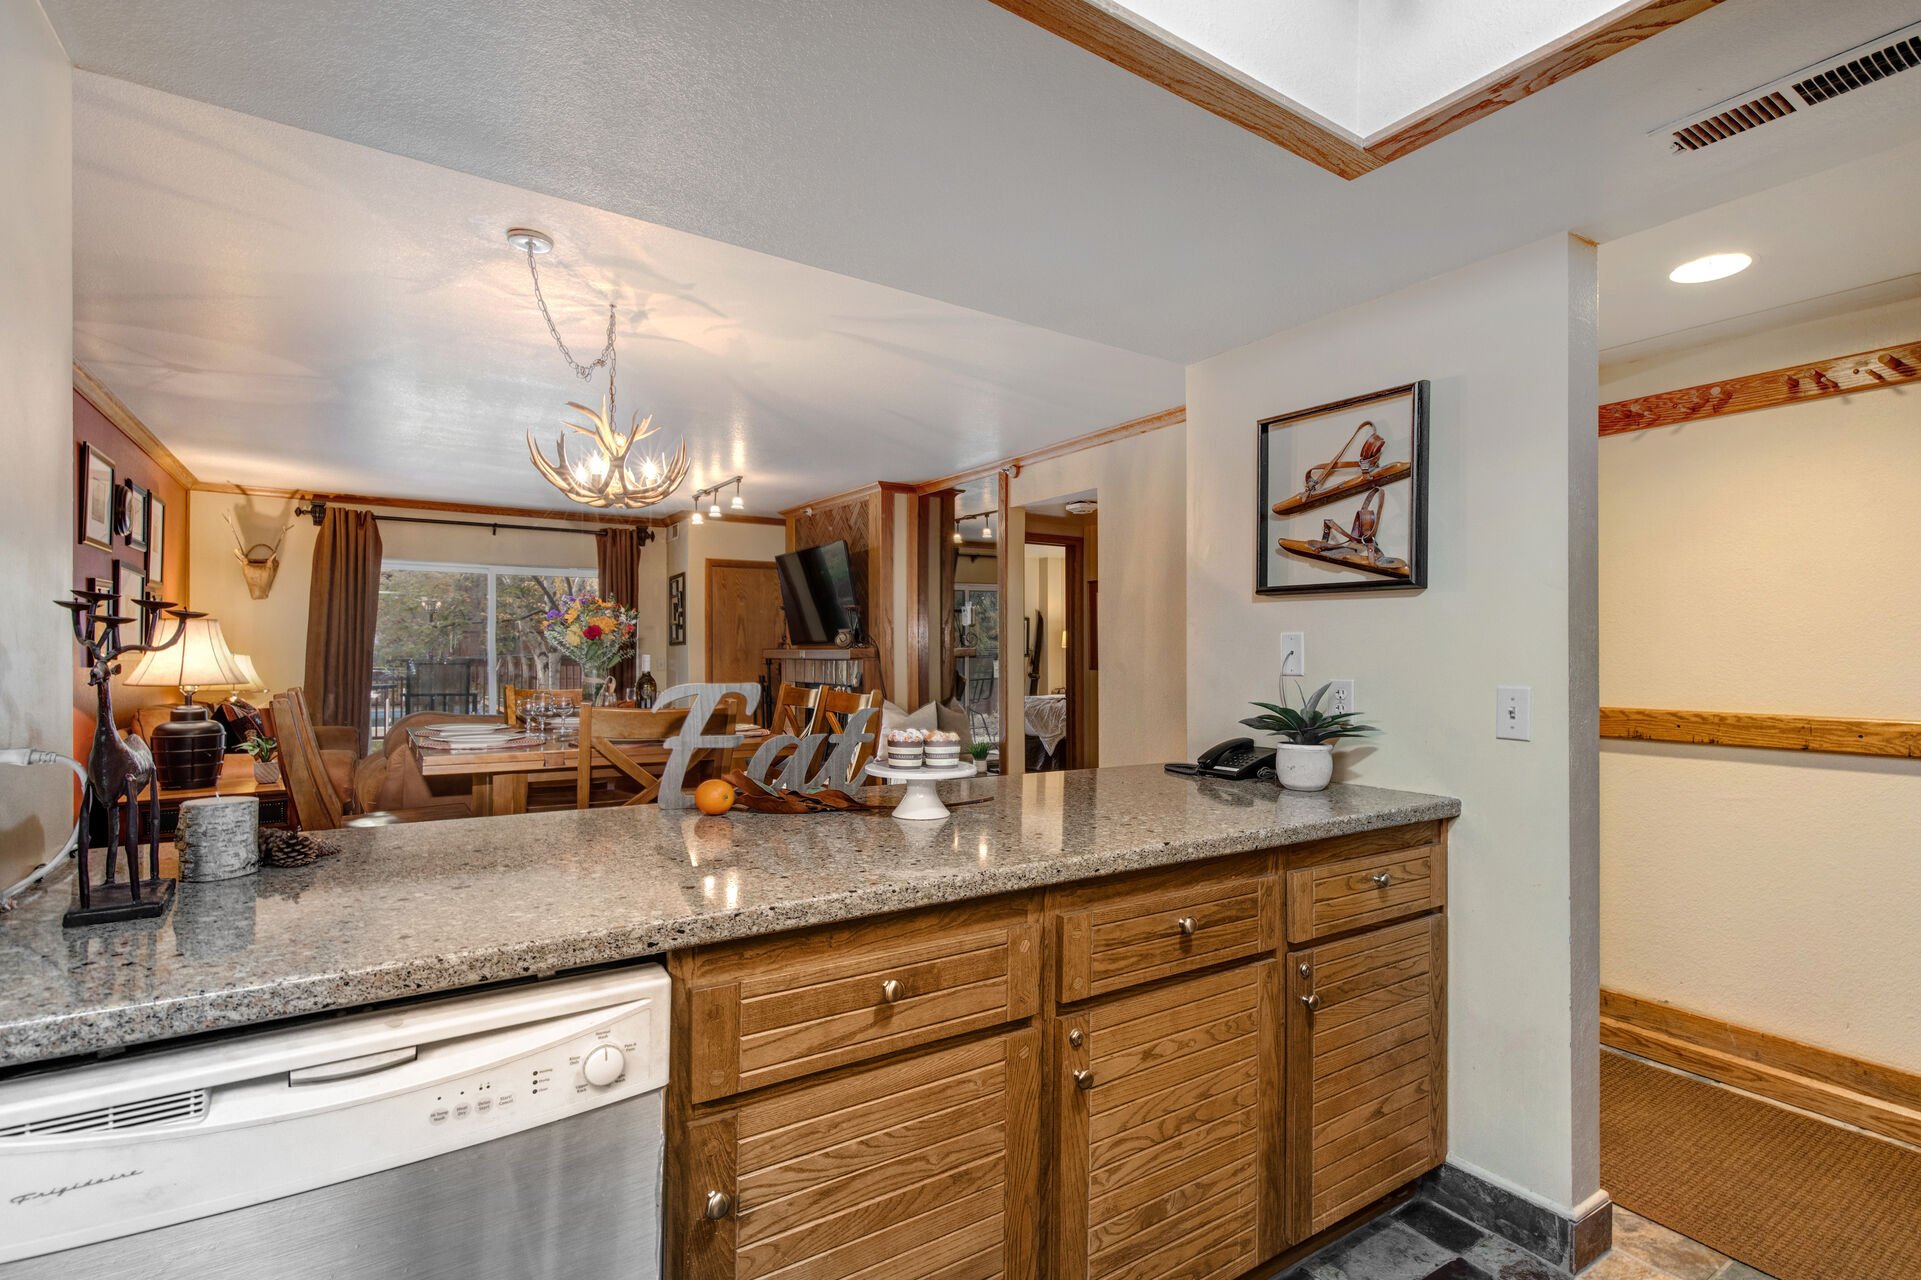 Fully Equipped Kitchen with ample counter space and stainless steel appliances